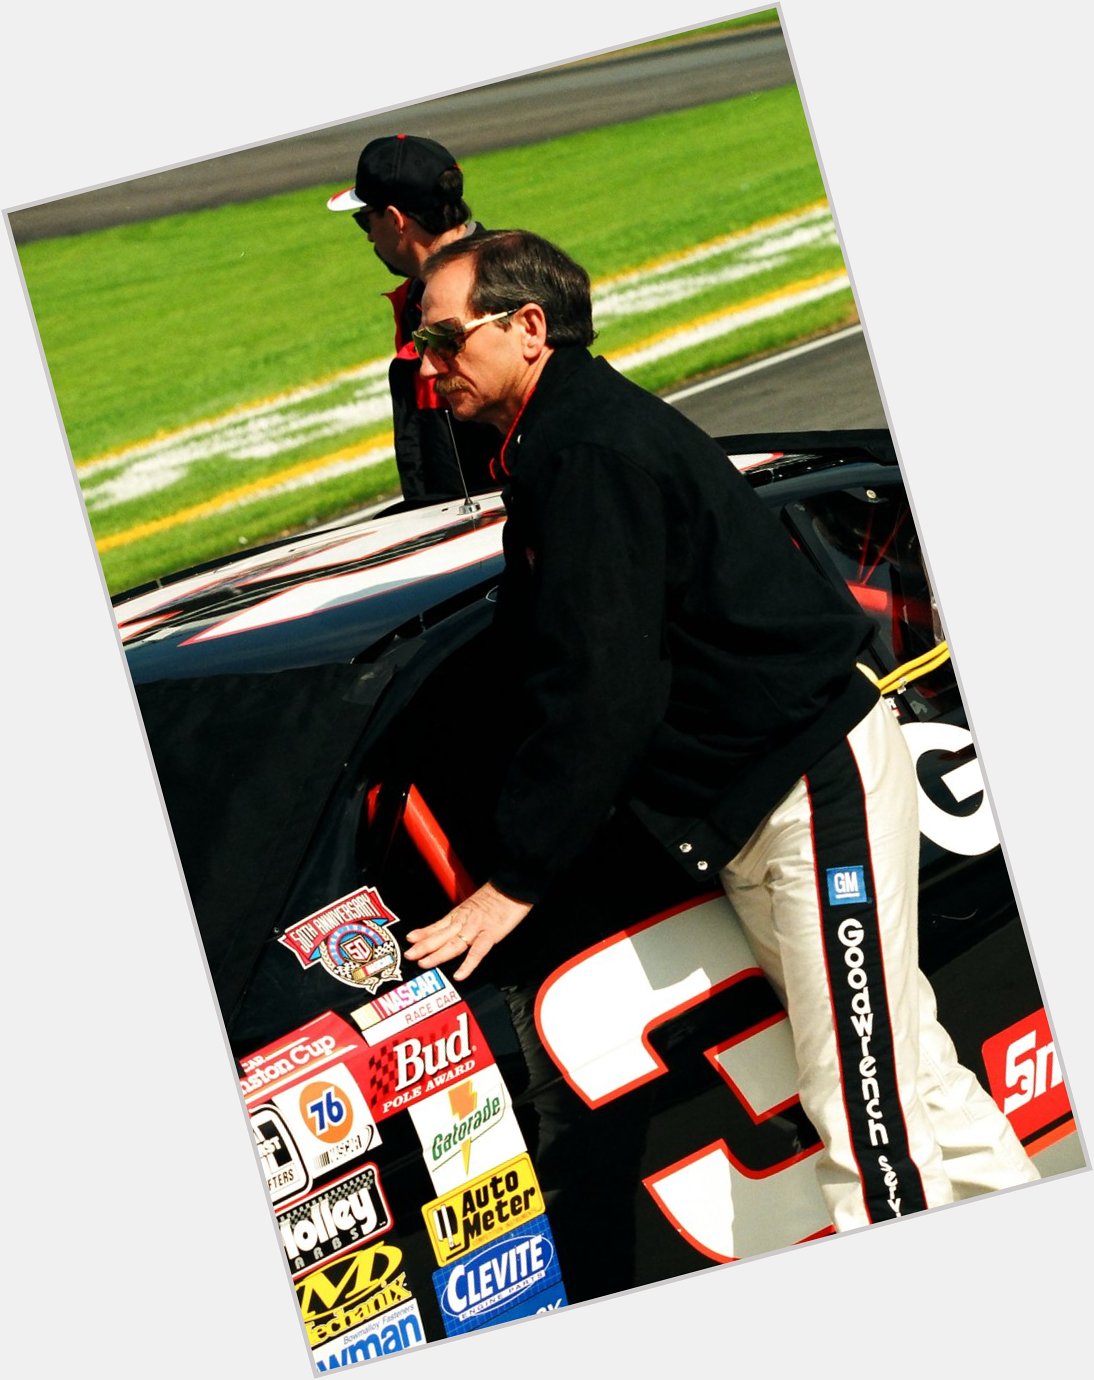 Call him The Intimidator, Ironhead, whatever. The easiest is just The Man. Happy birthday to Dale Earnhardt. 